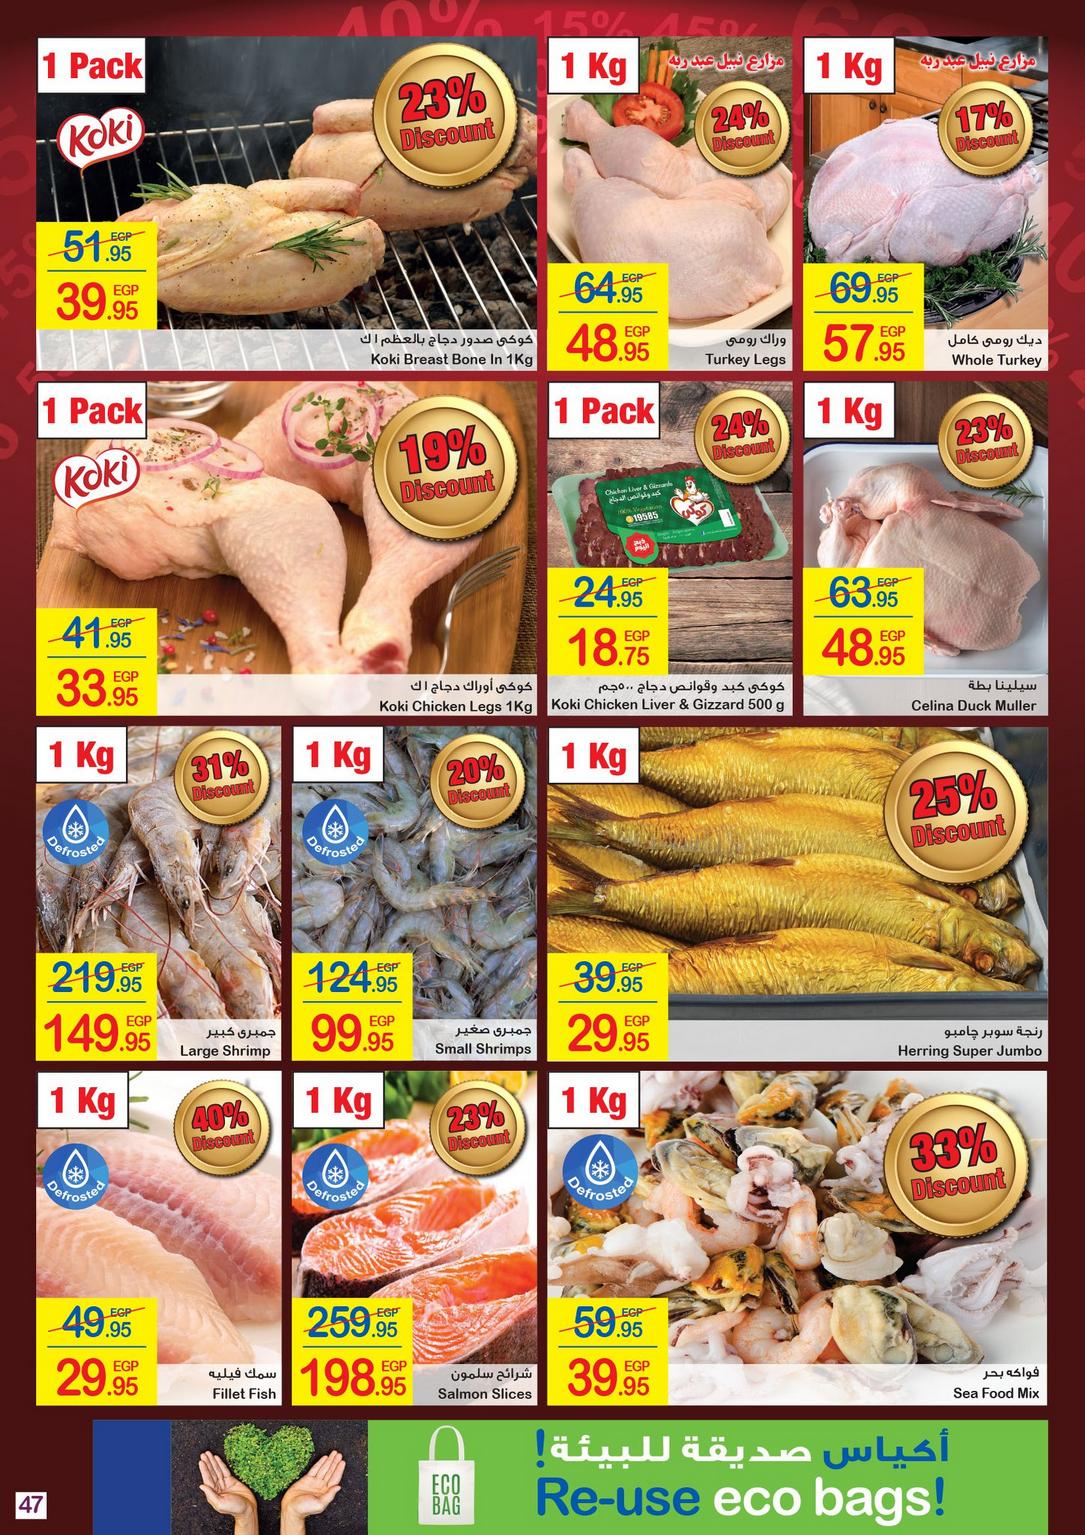 Carrefour Deals from 1/1 till 14/1 | Carrefour Egypt 48